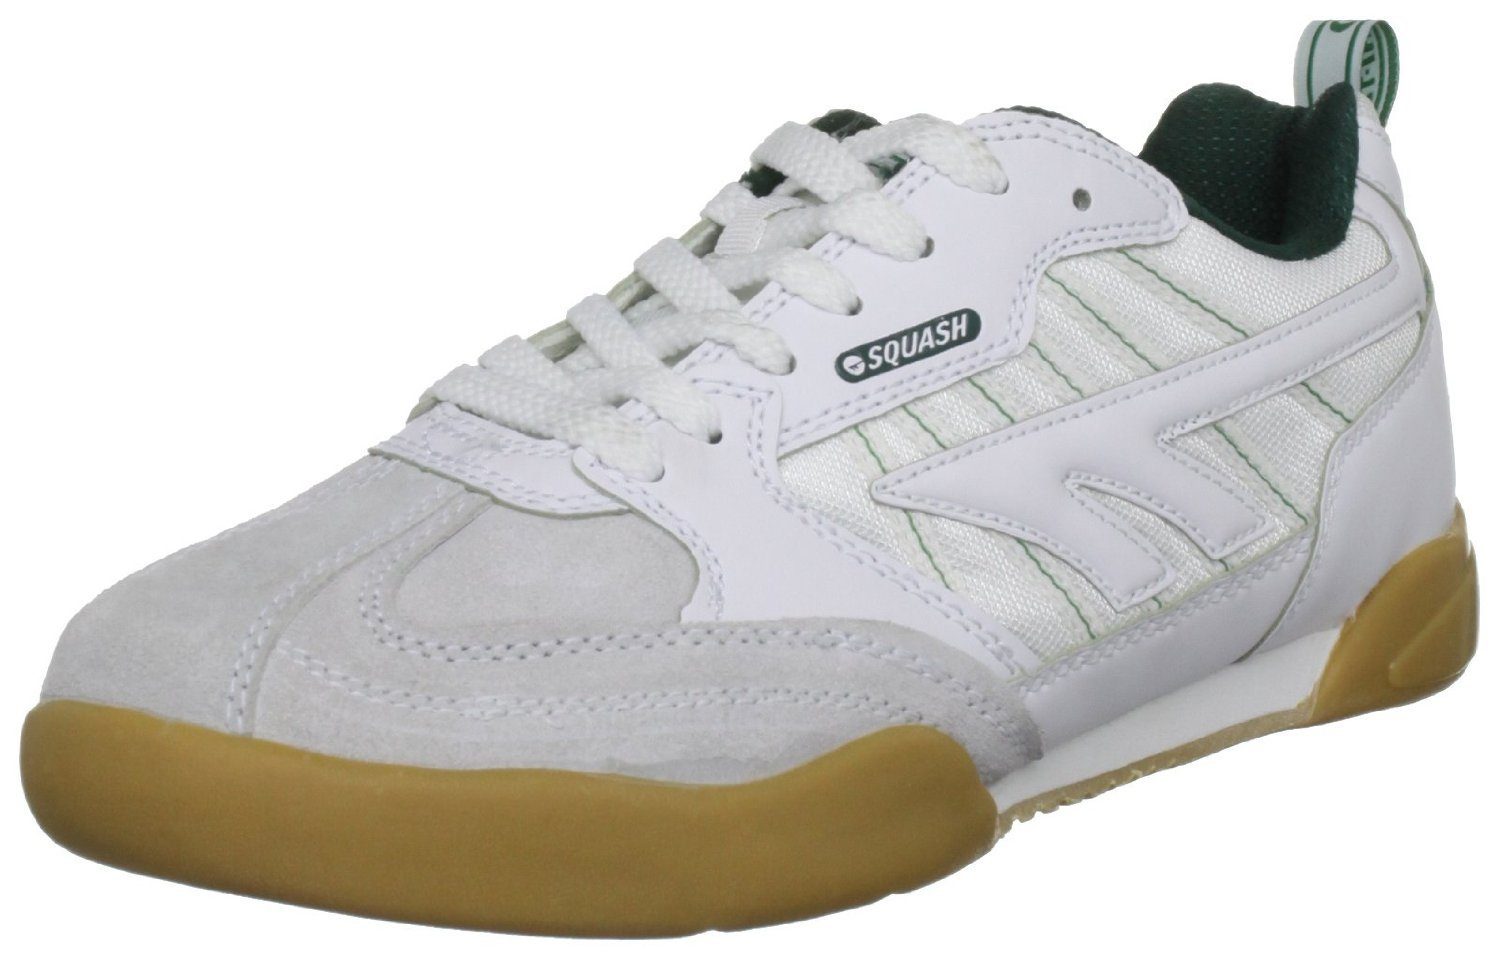 Mens Hi-Tec Indoor Sports Squash Tennis Gym Running Lace Up Leather Trainers 